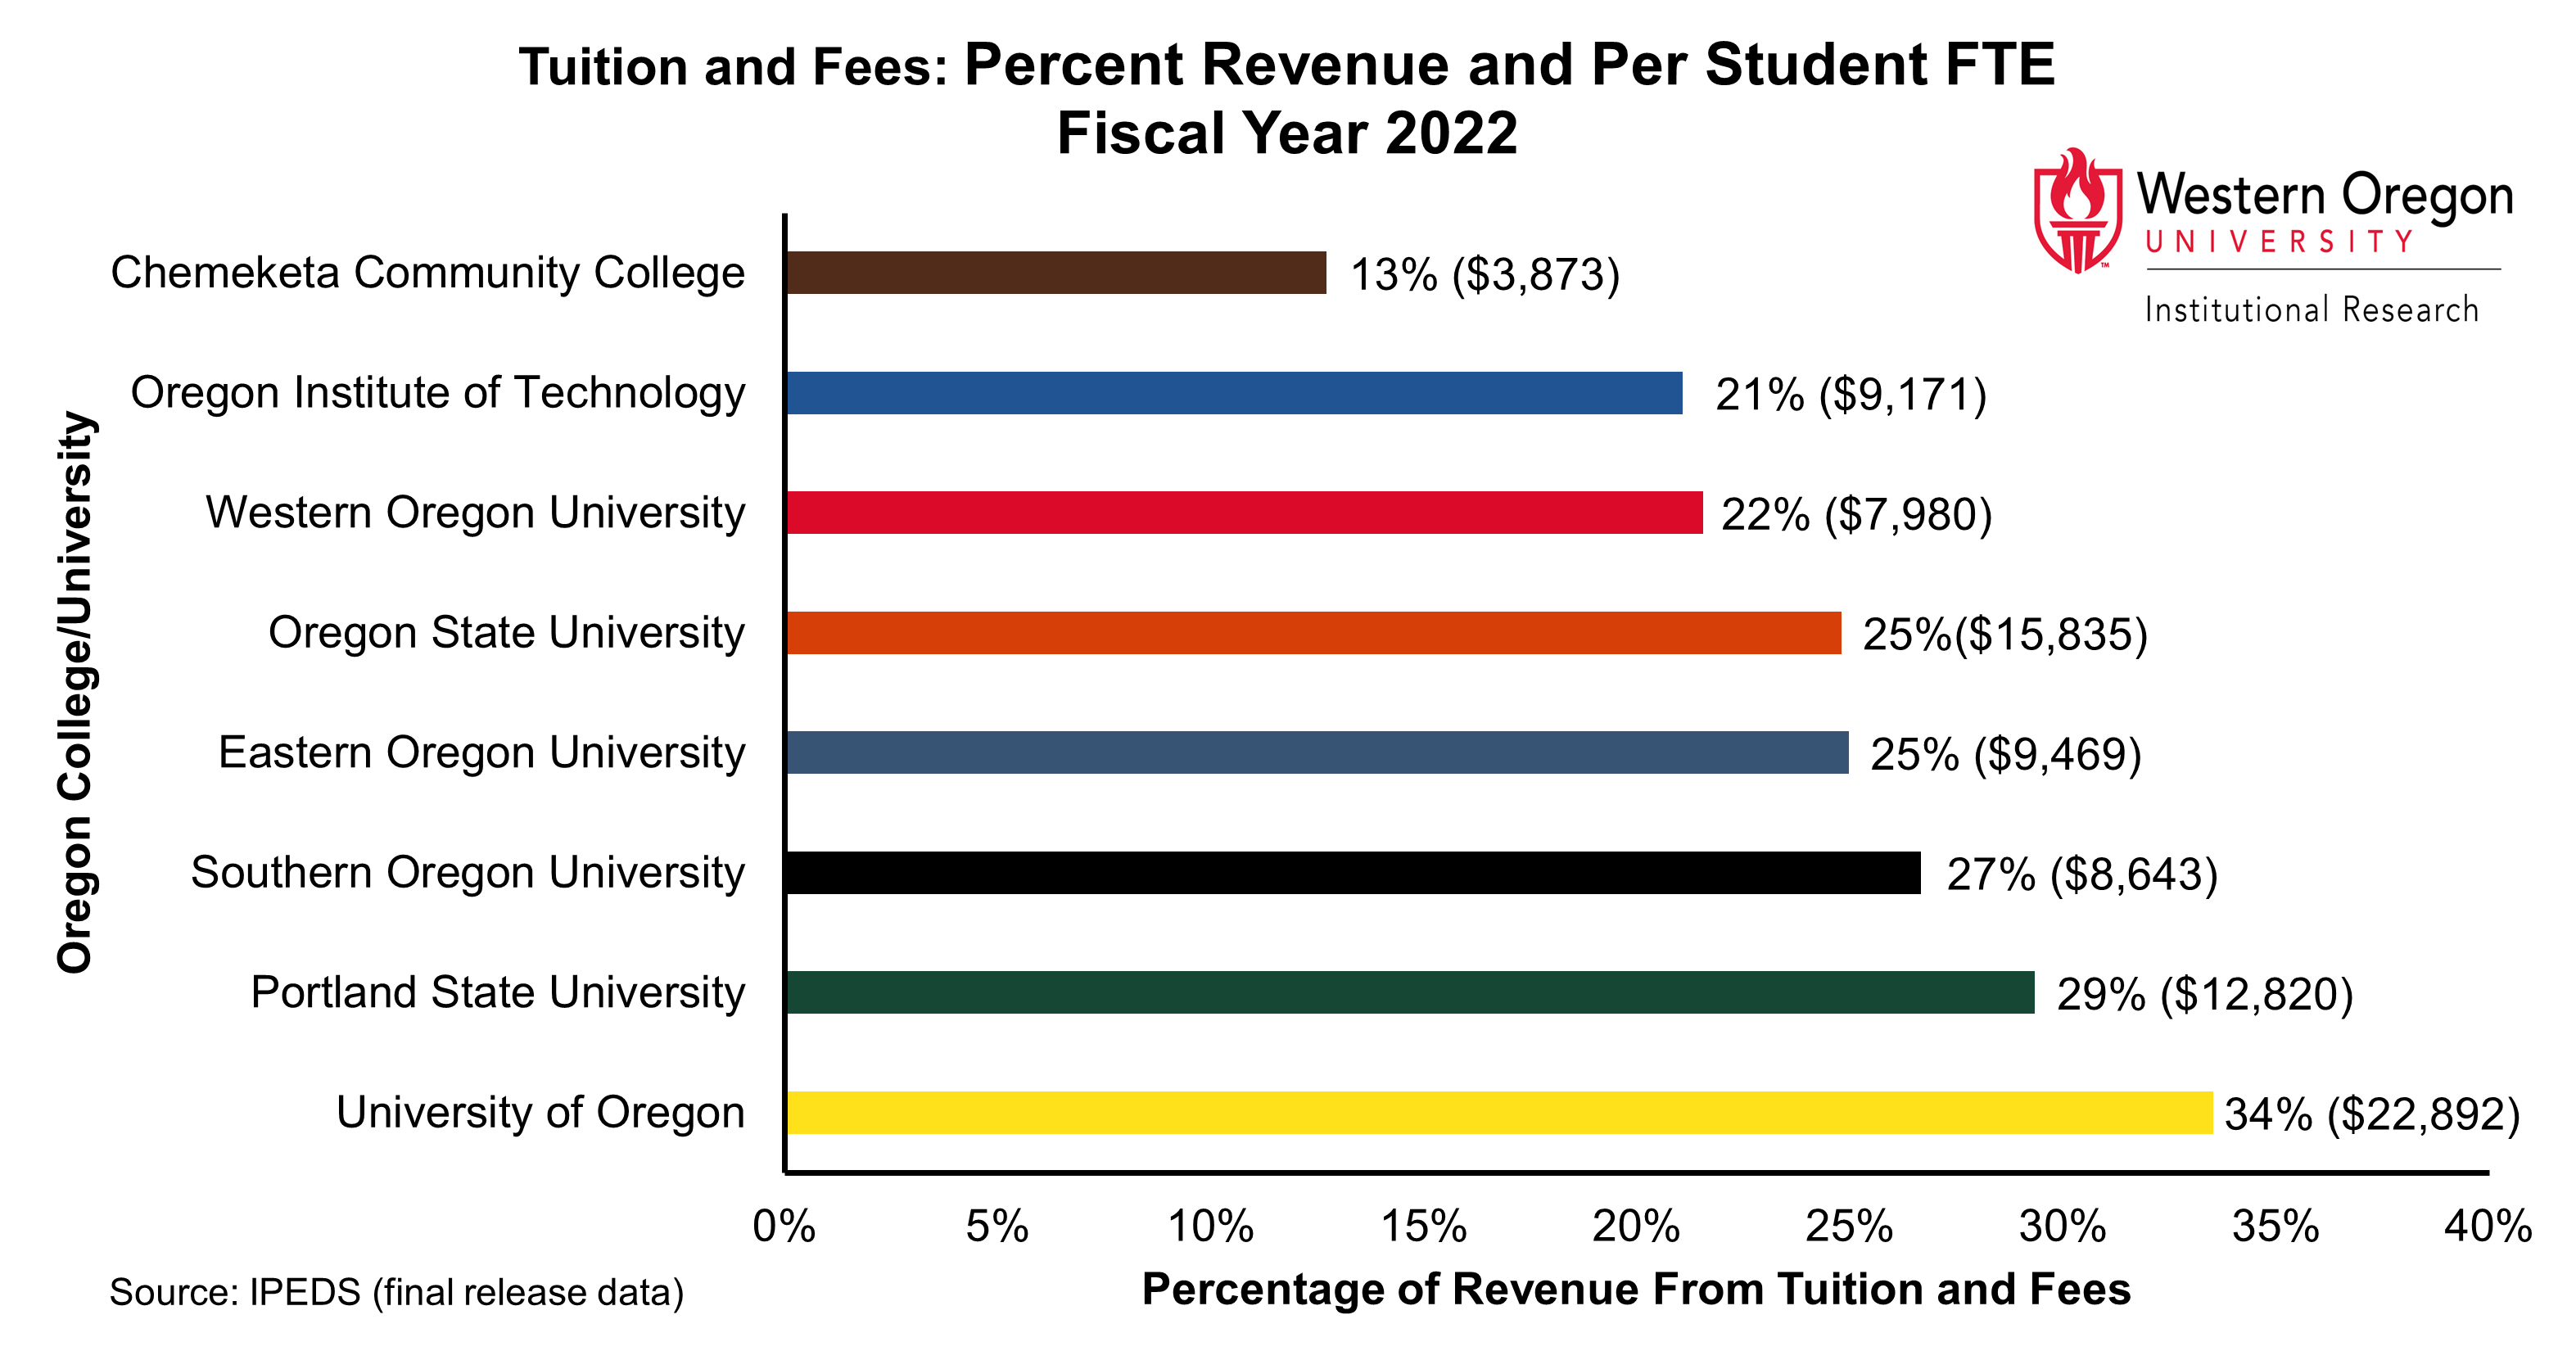 Bar graph of the percentage of revenue from tuition and fees for WOU and other Oregon Public Universities in fiscal year 2022, showing percentages that range from 13% to 34% with WOU's at 22%.